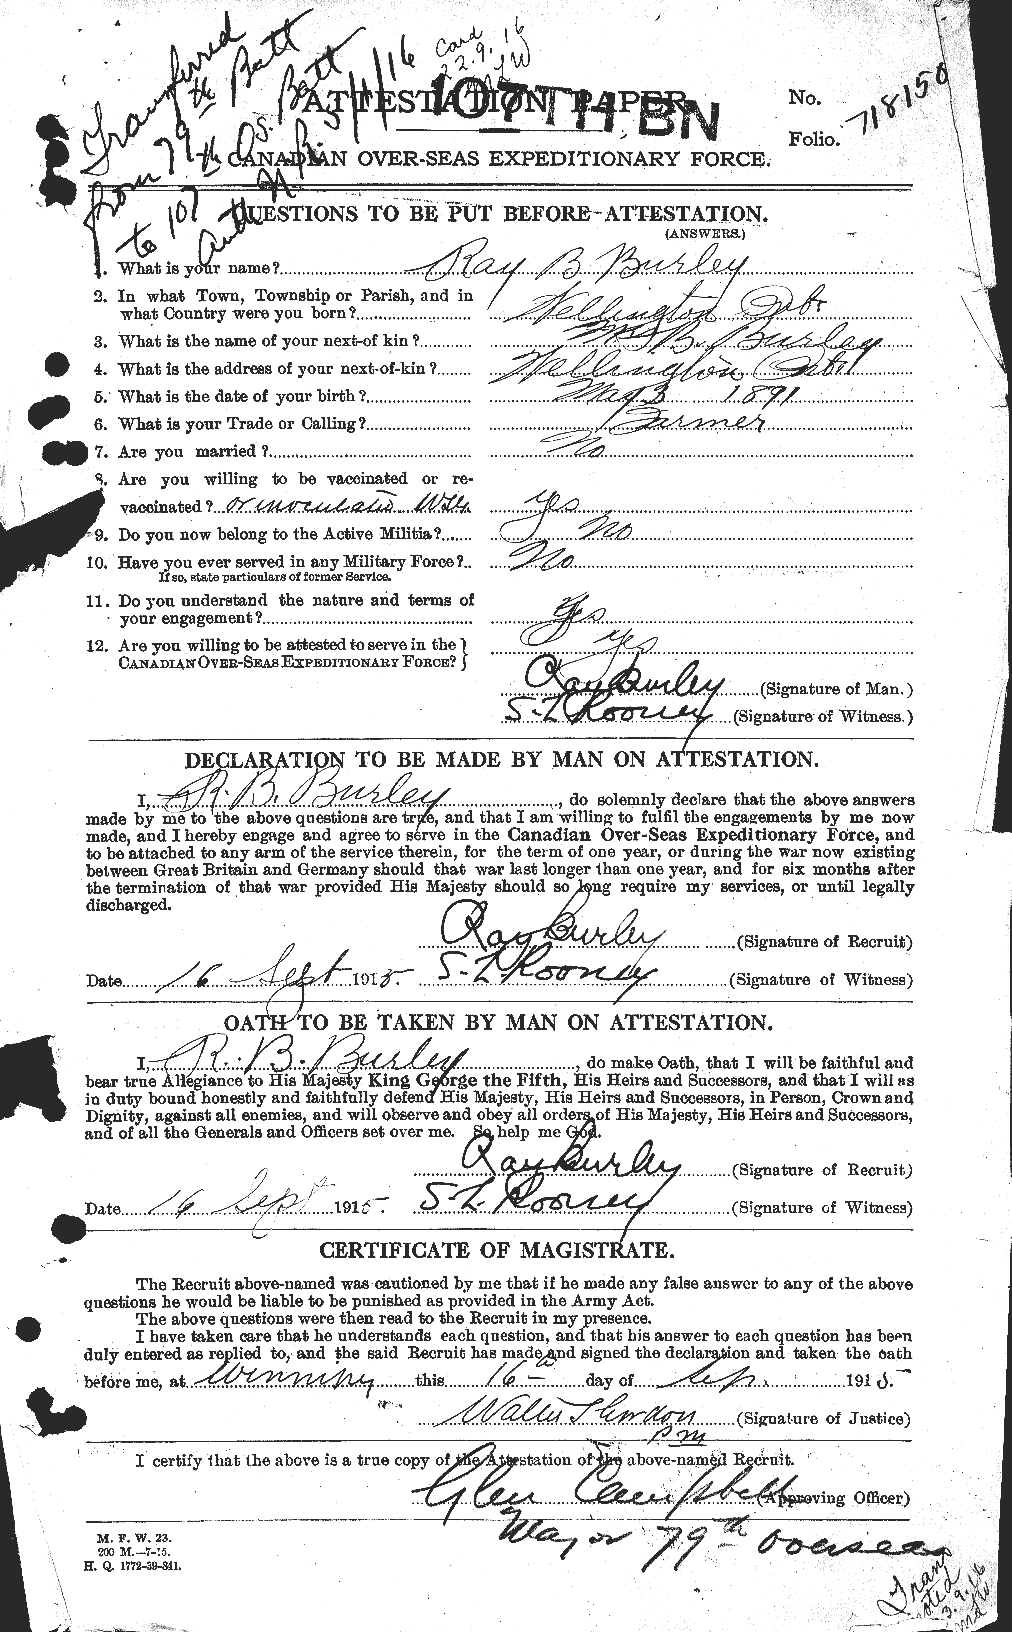 Personnel Records of the First World War - CEF 271853a